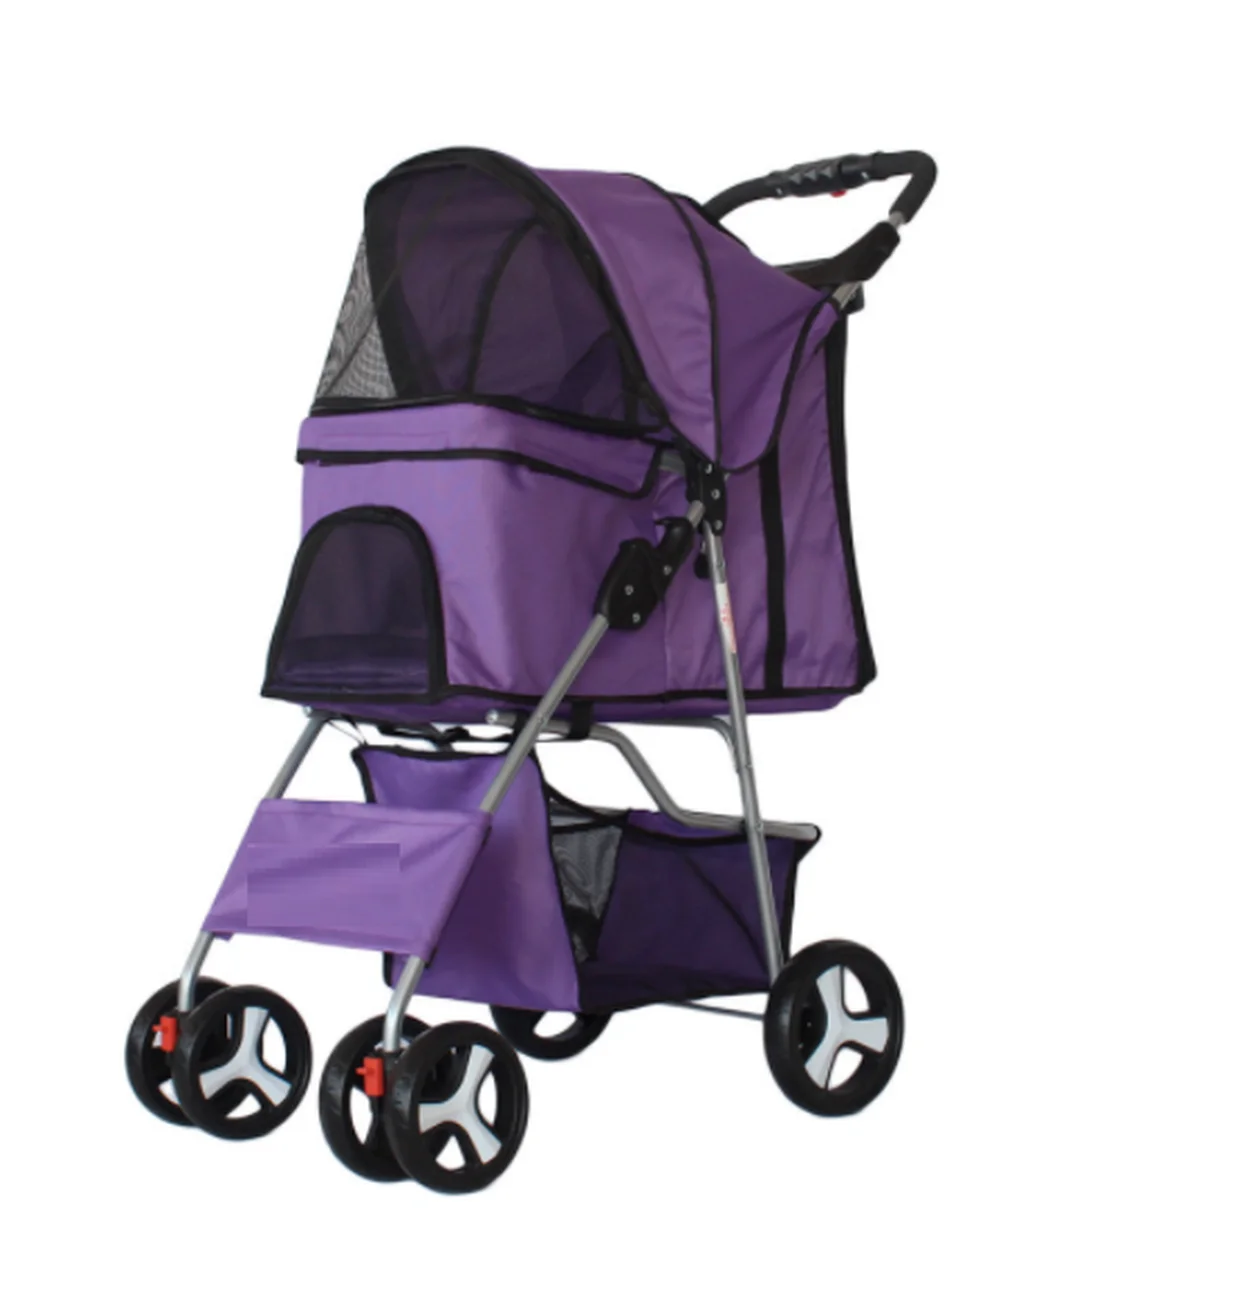 Pet Stroller for Cats/Dogs One-Hand Fold Breathable Animal Stroller with 4 Wheel and Storage Space Dog Stroller